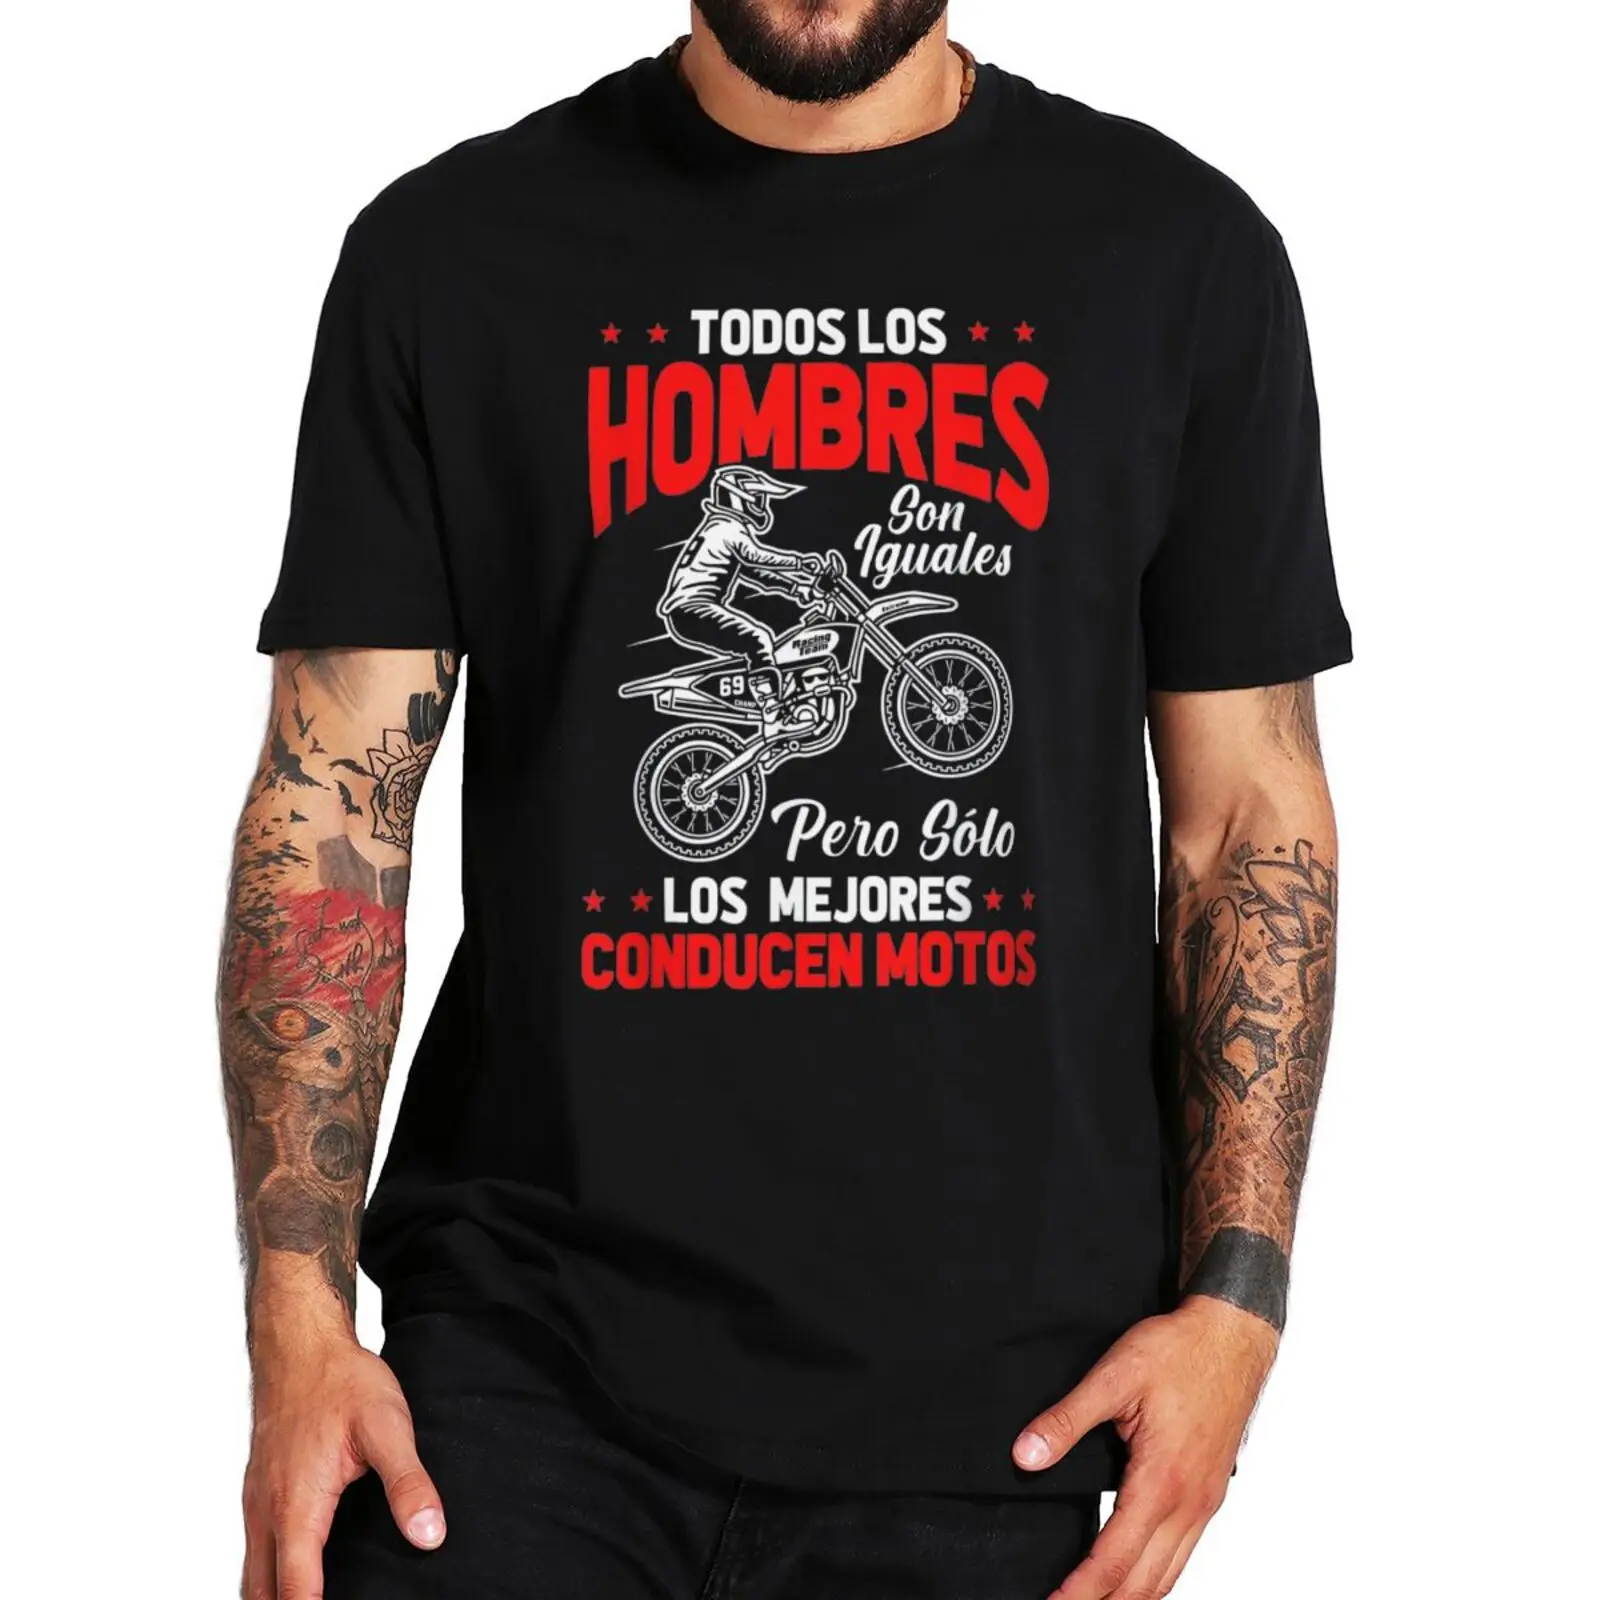 

Motocross Biker Men's T Shirt With Spanish The Best Ride Motorcycles Funny Tshirts 100% Cotton EU Size Homme Camiseta